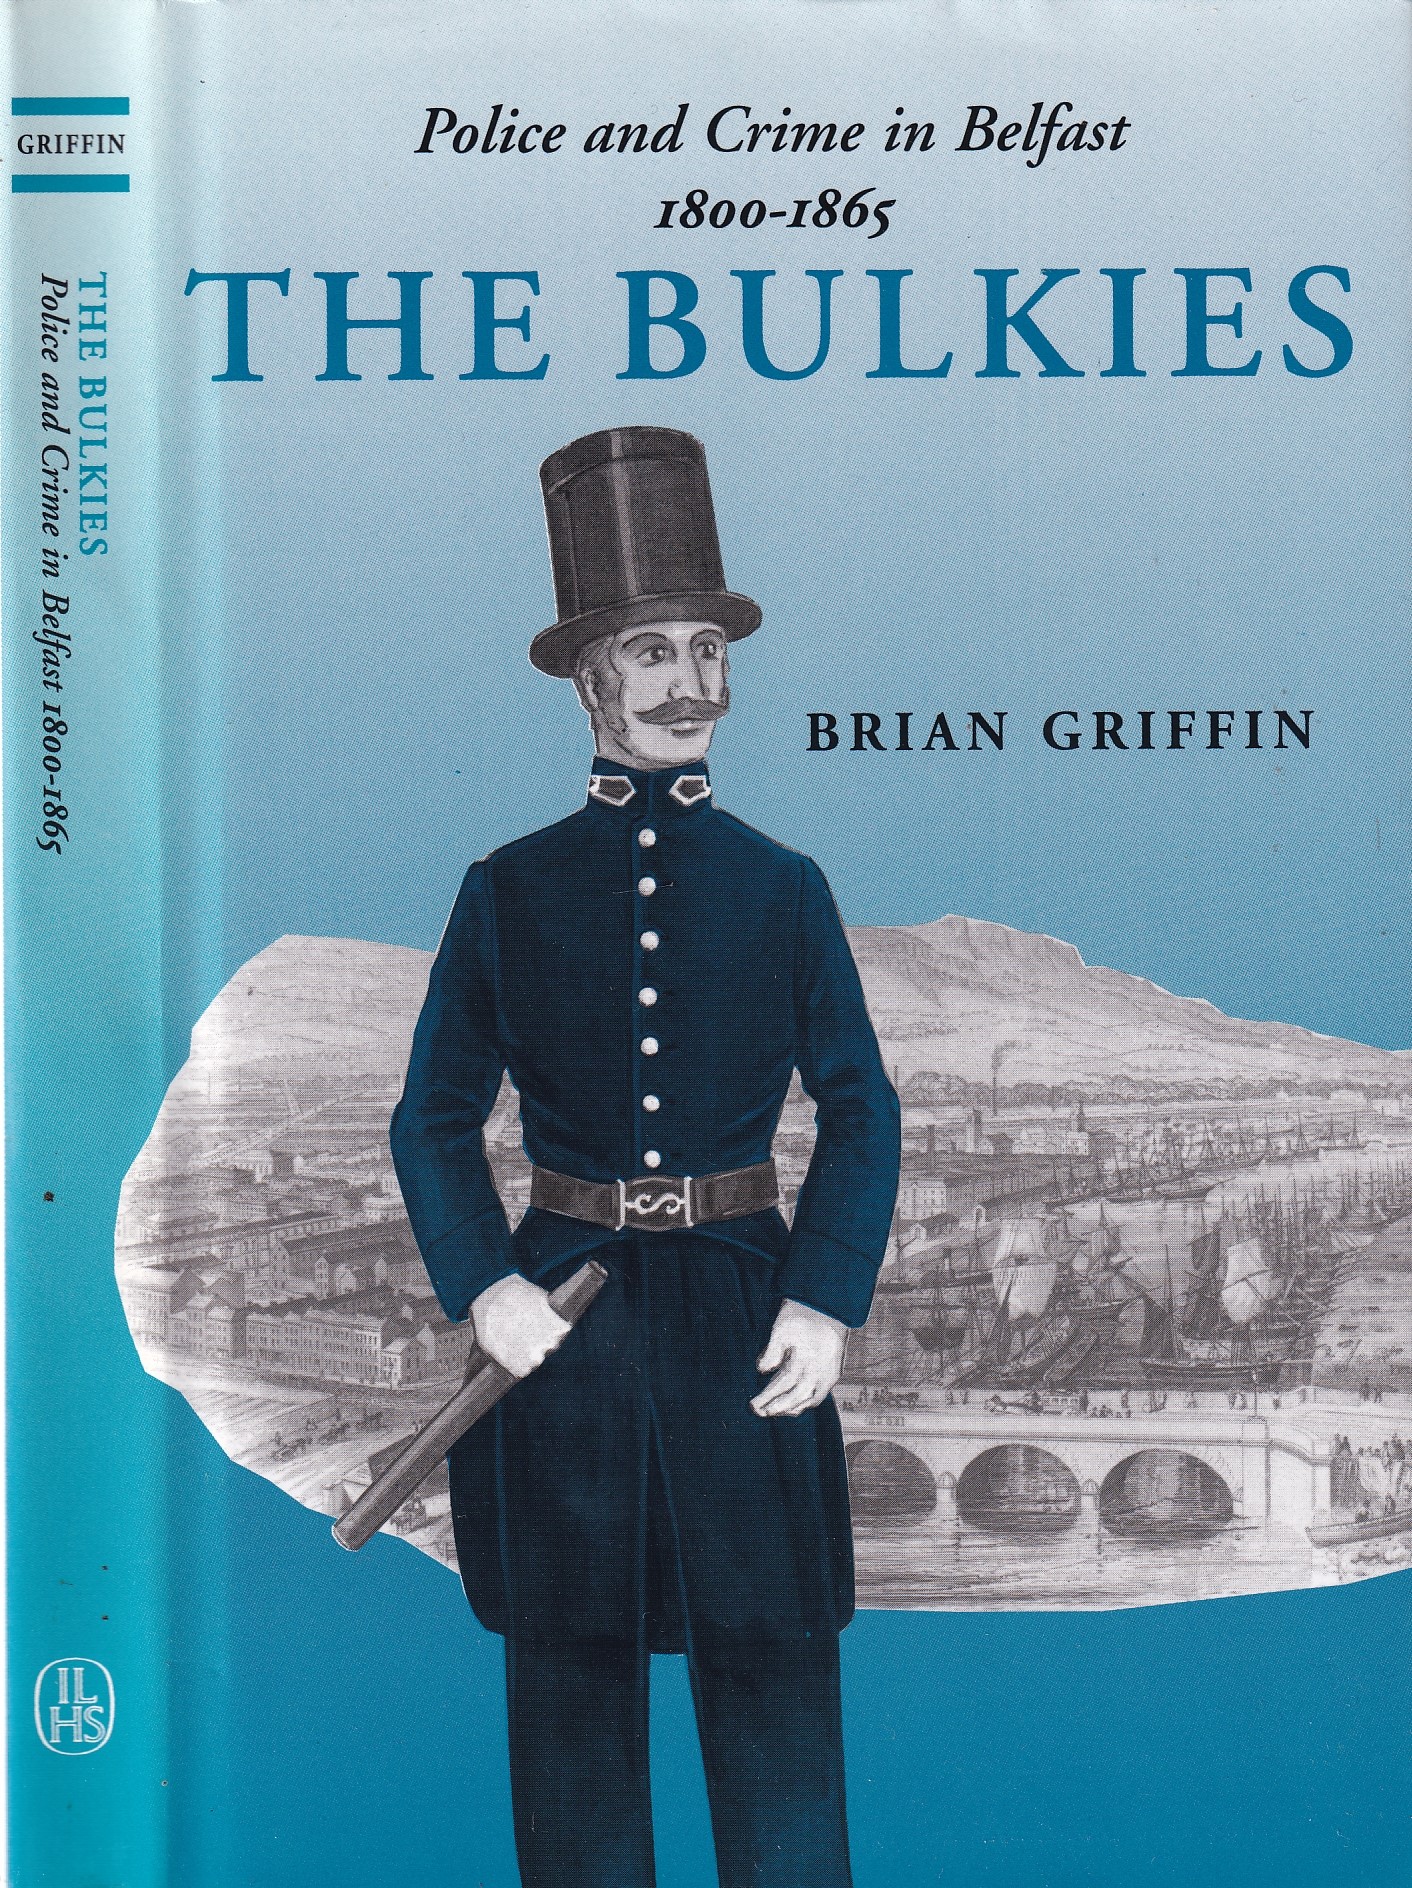 The Bulkies: Police and Crime in Belfast, 1800-1865 by Brian Griffin